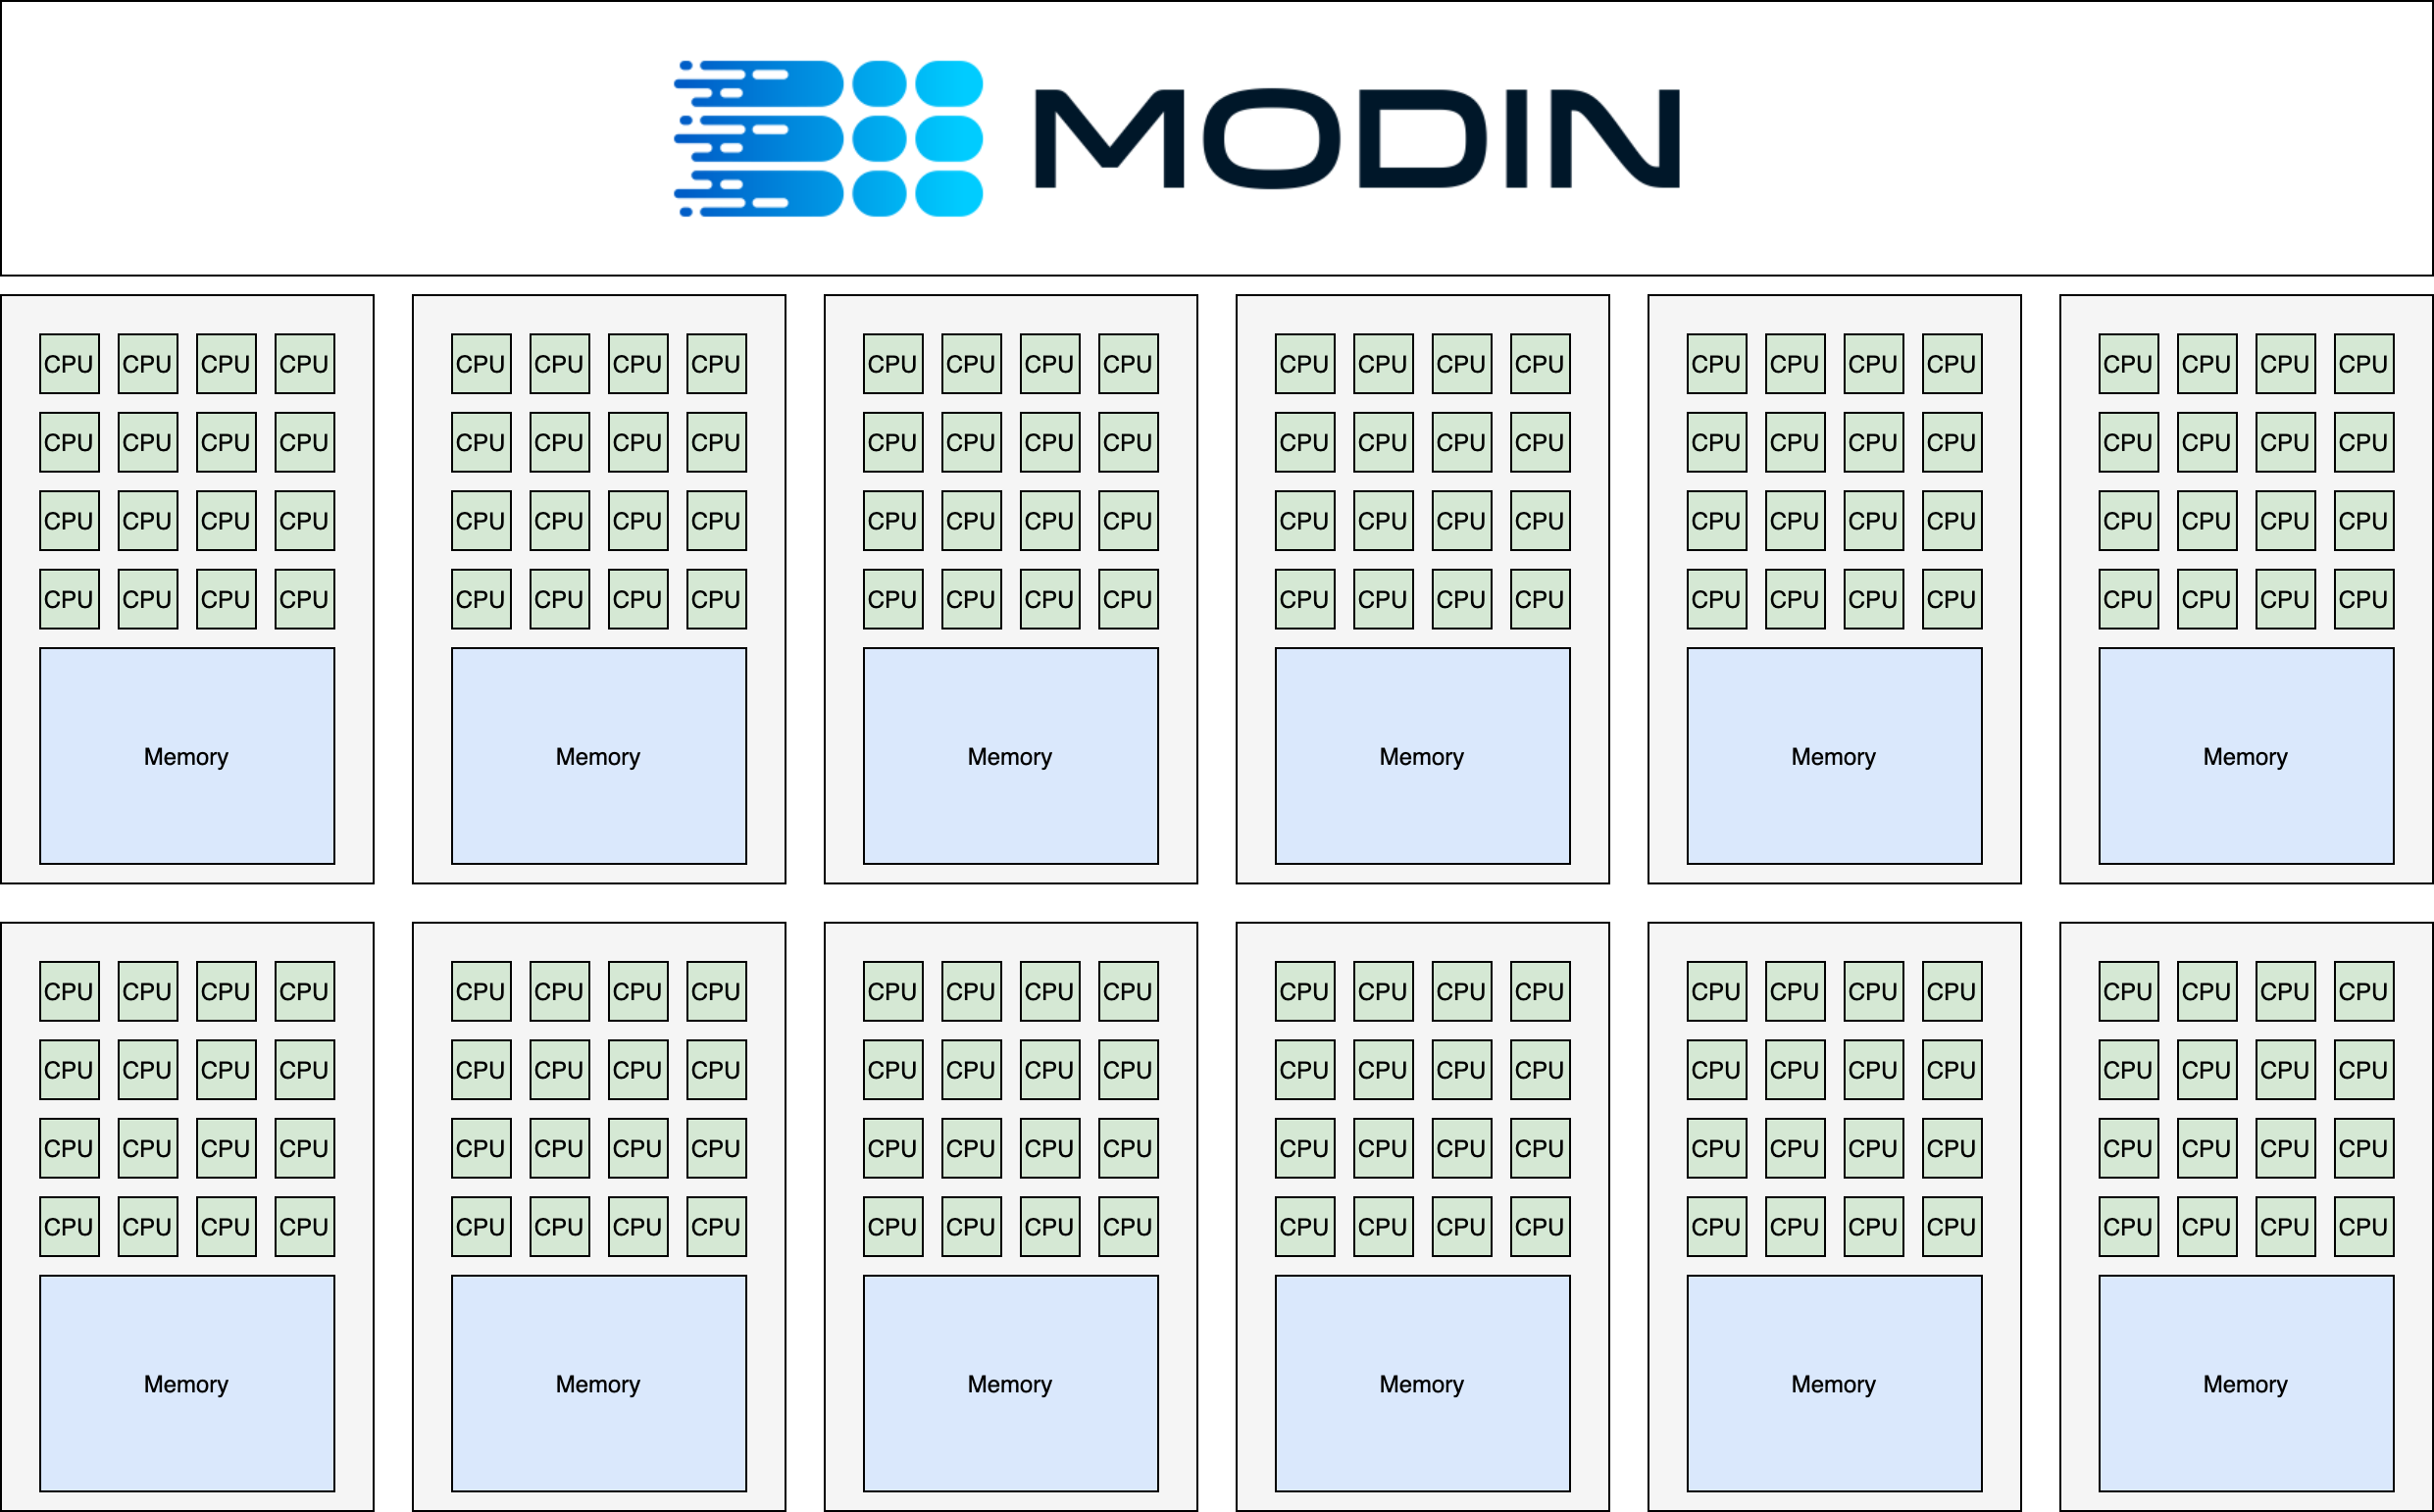 modin works on a cluster too!